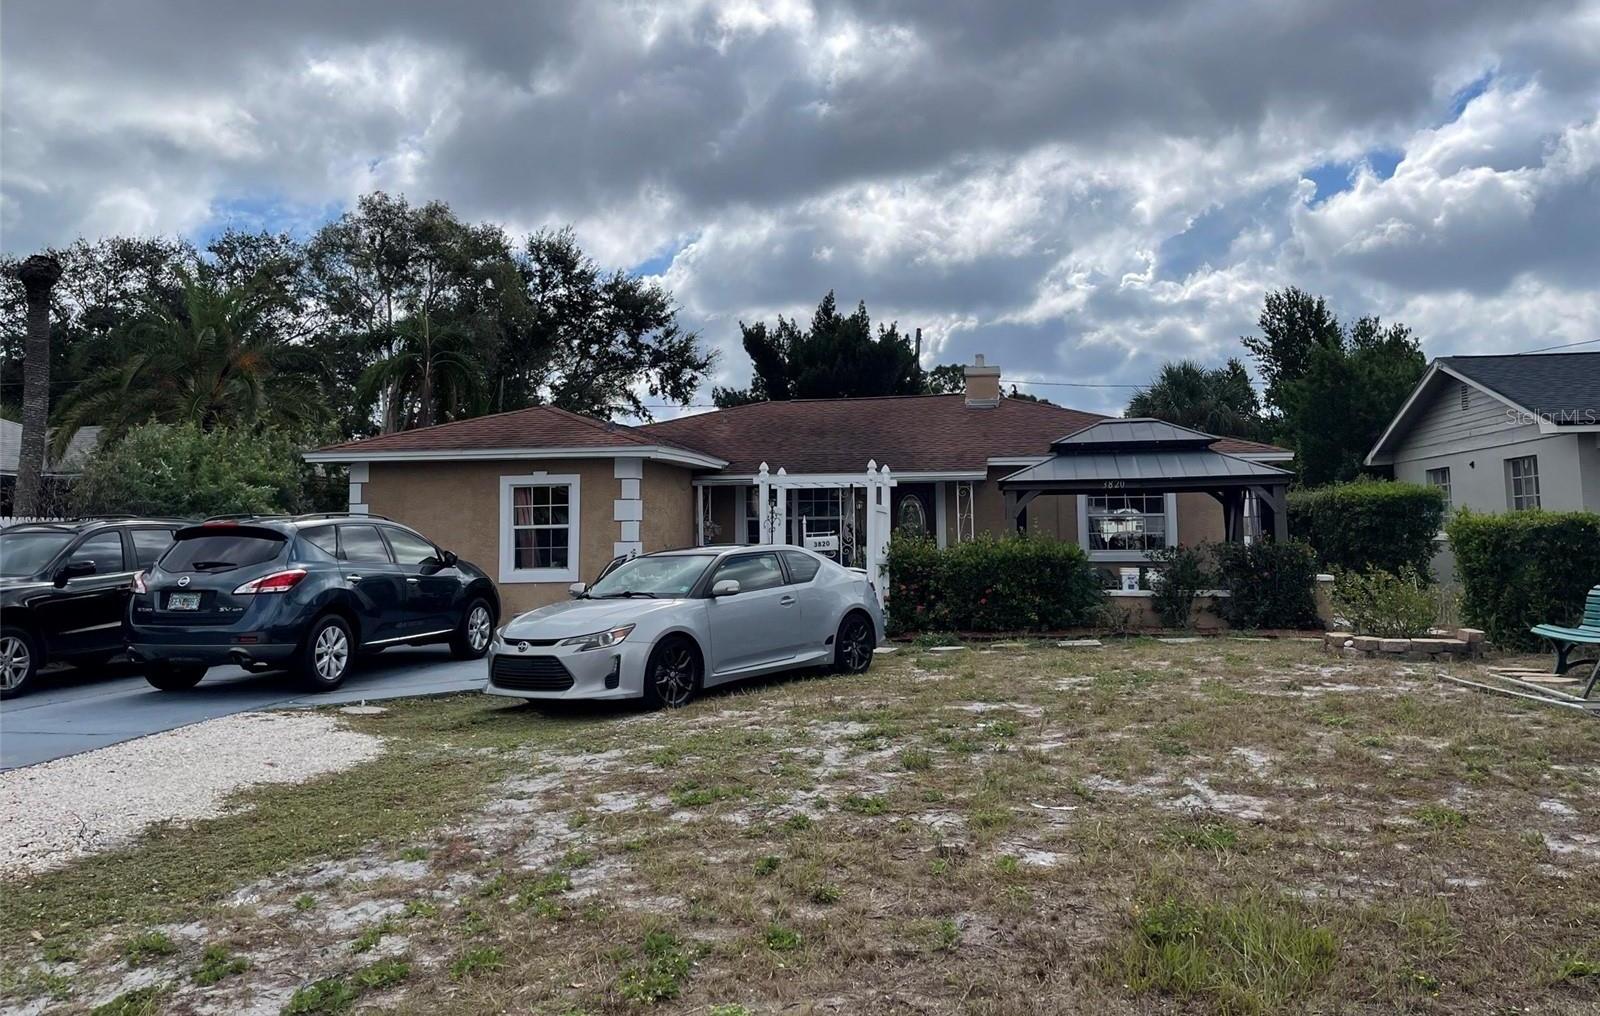 Photo one of 3820 1St S Ave St Petersburg FL 33711 | MLS T3487614